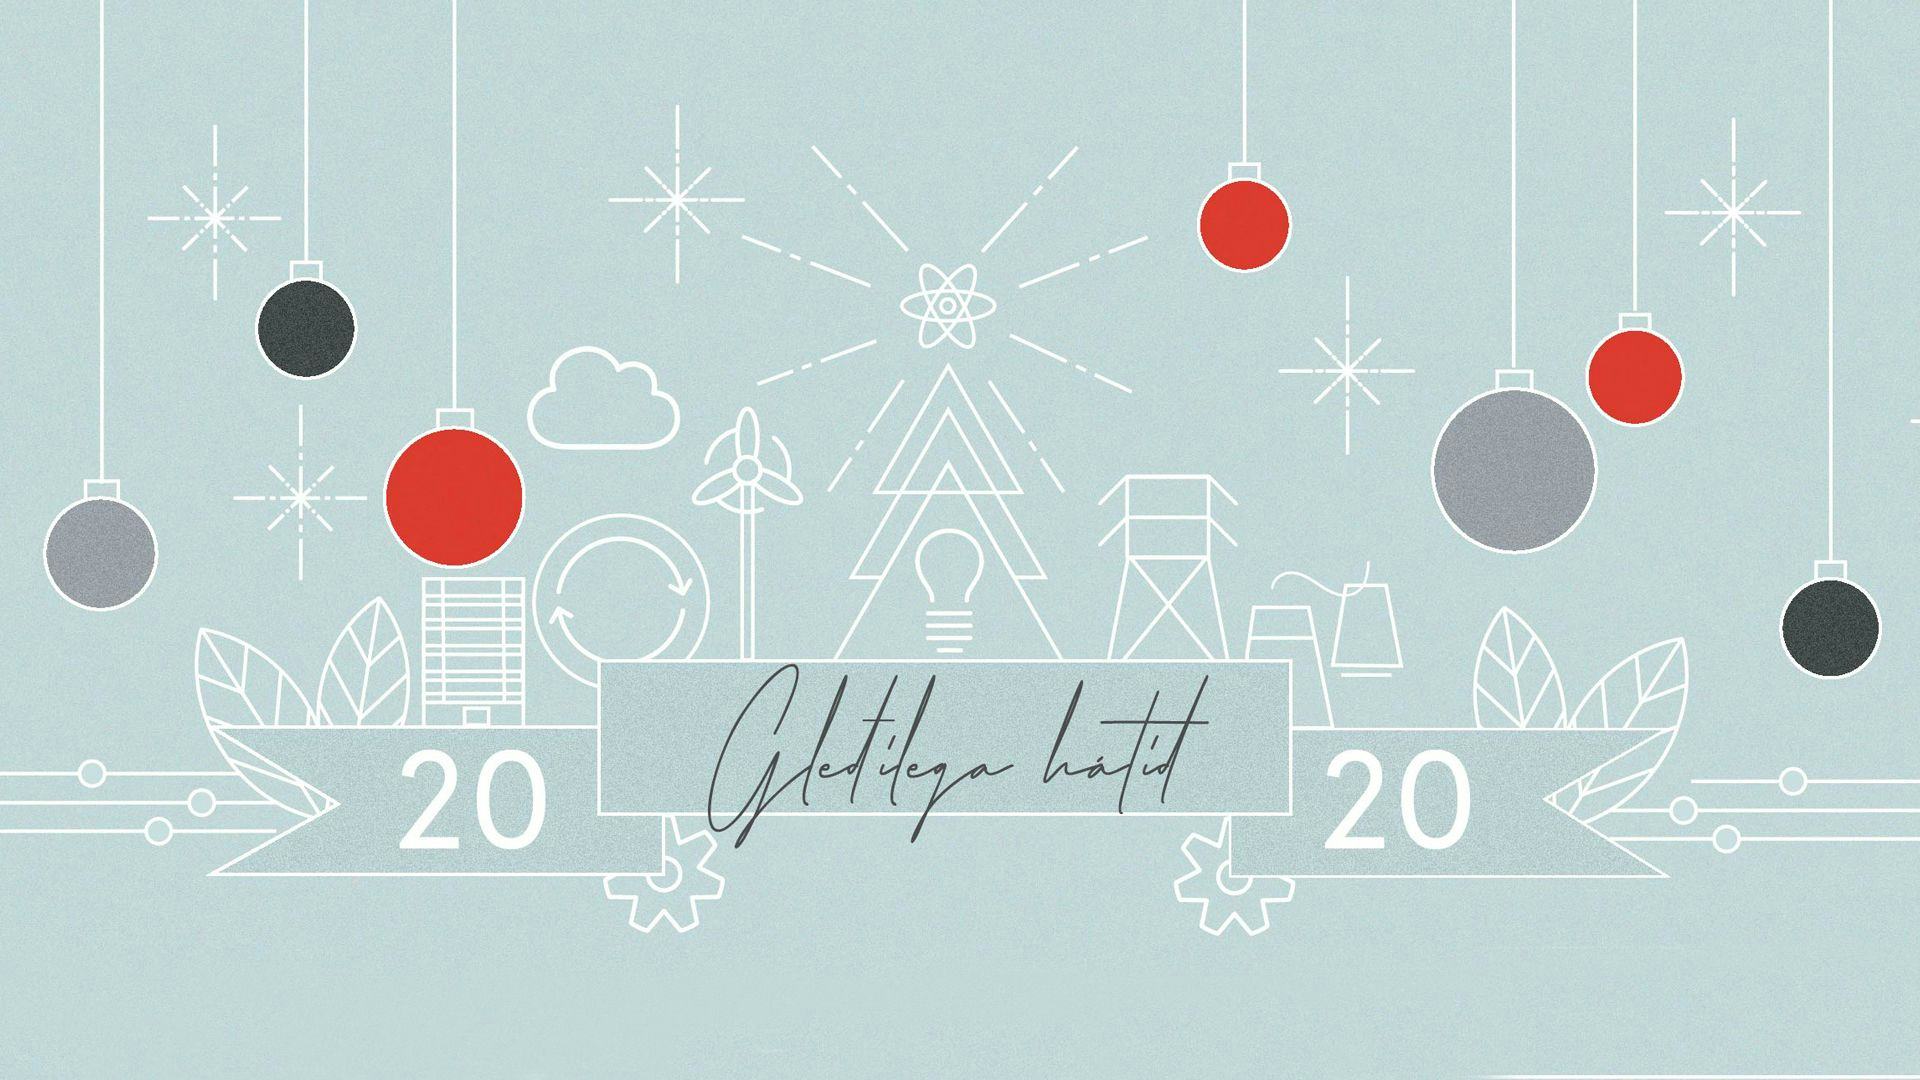 A graphic design of holiday theme icons such as Christmas tree, stars, light bulbs